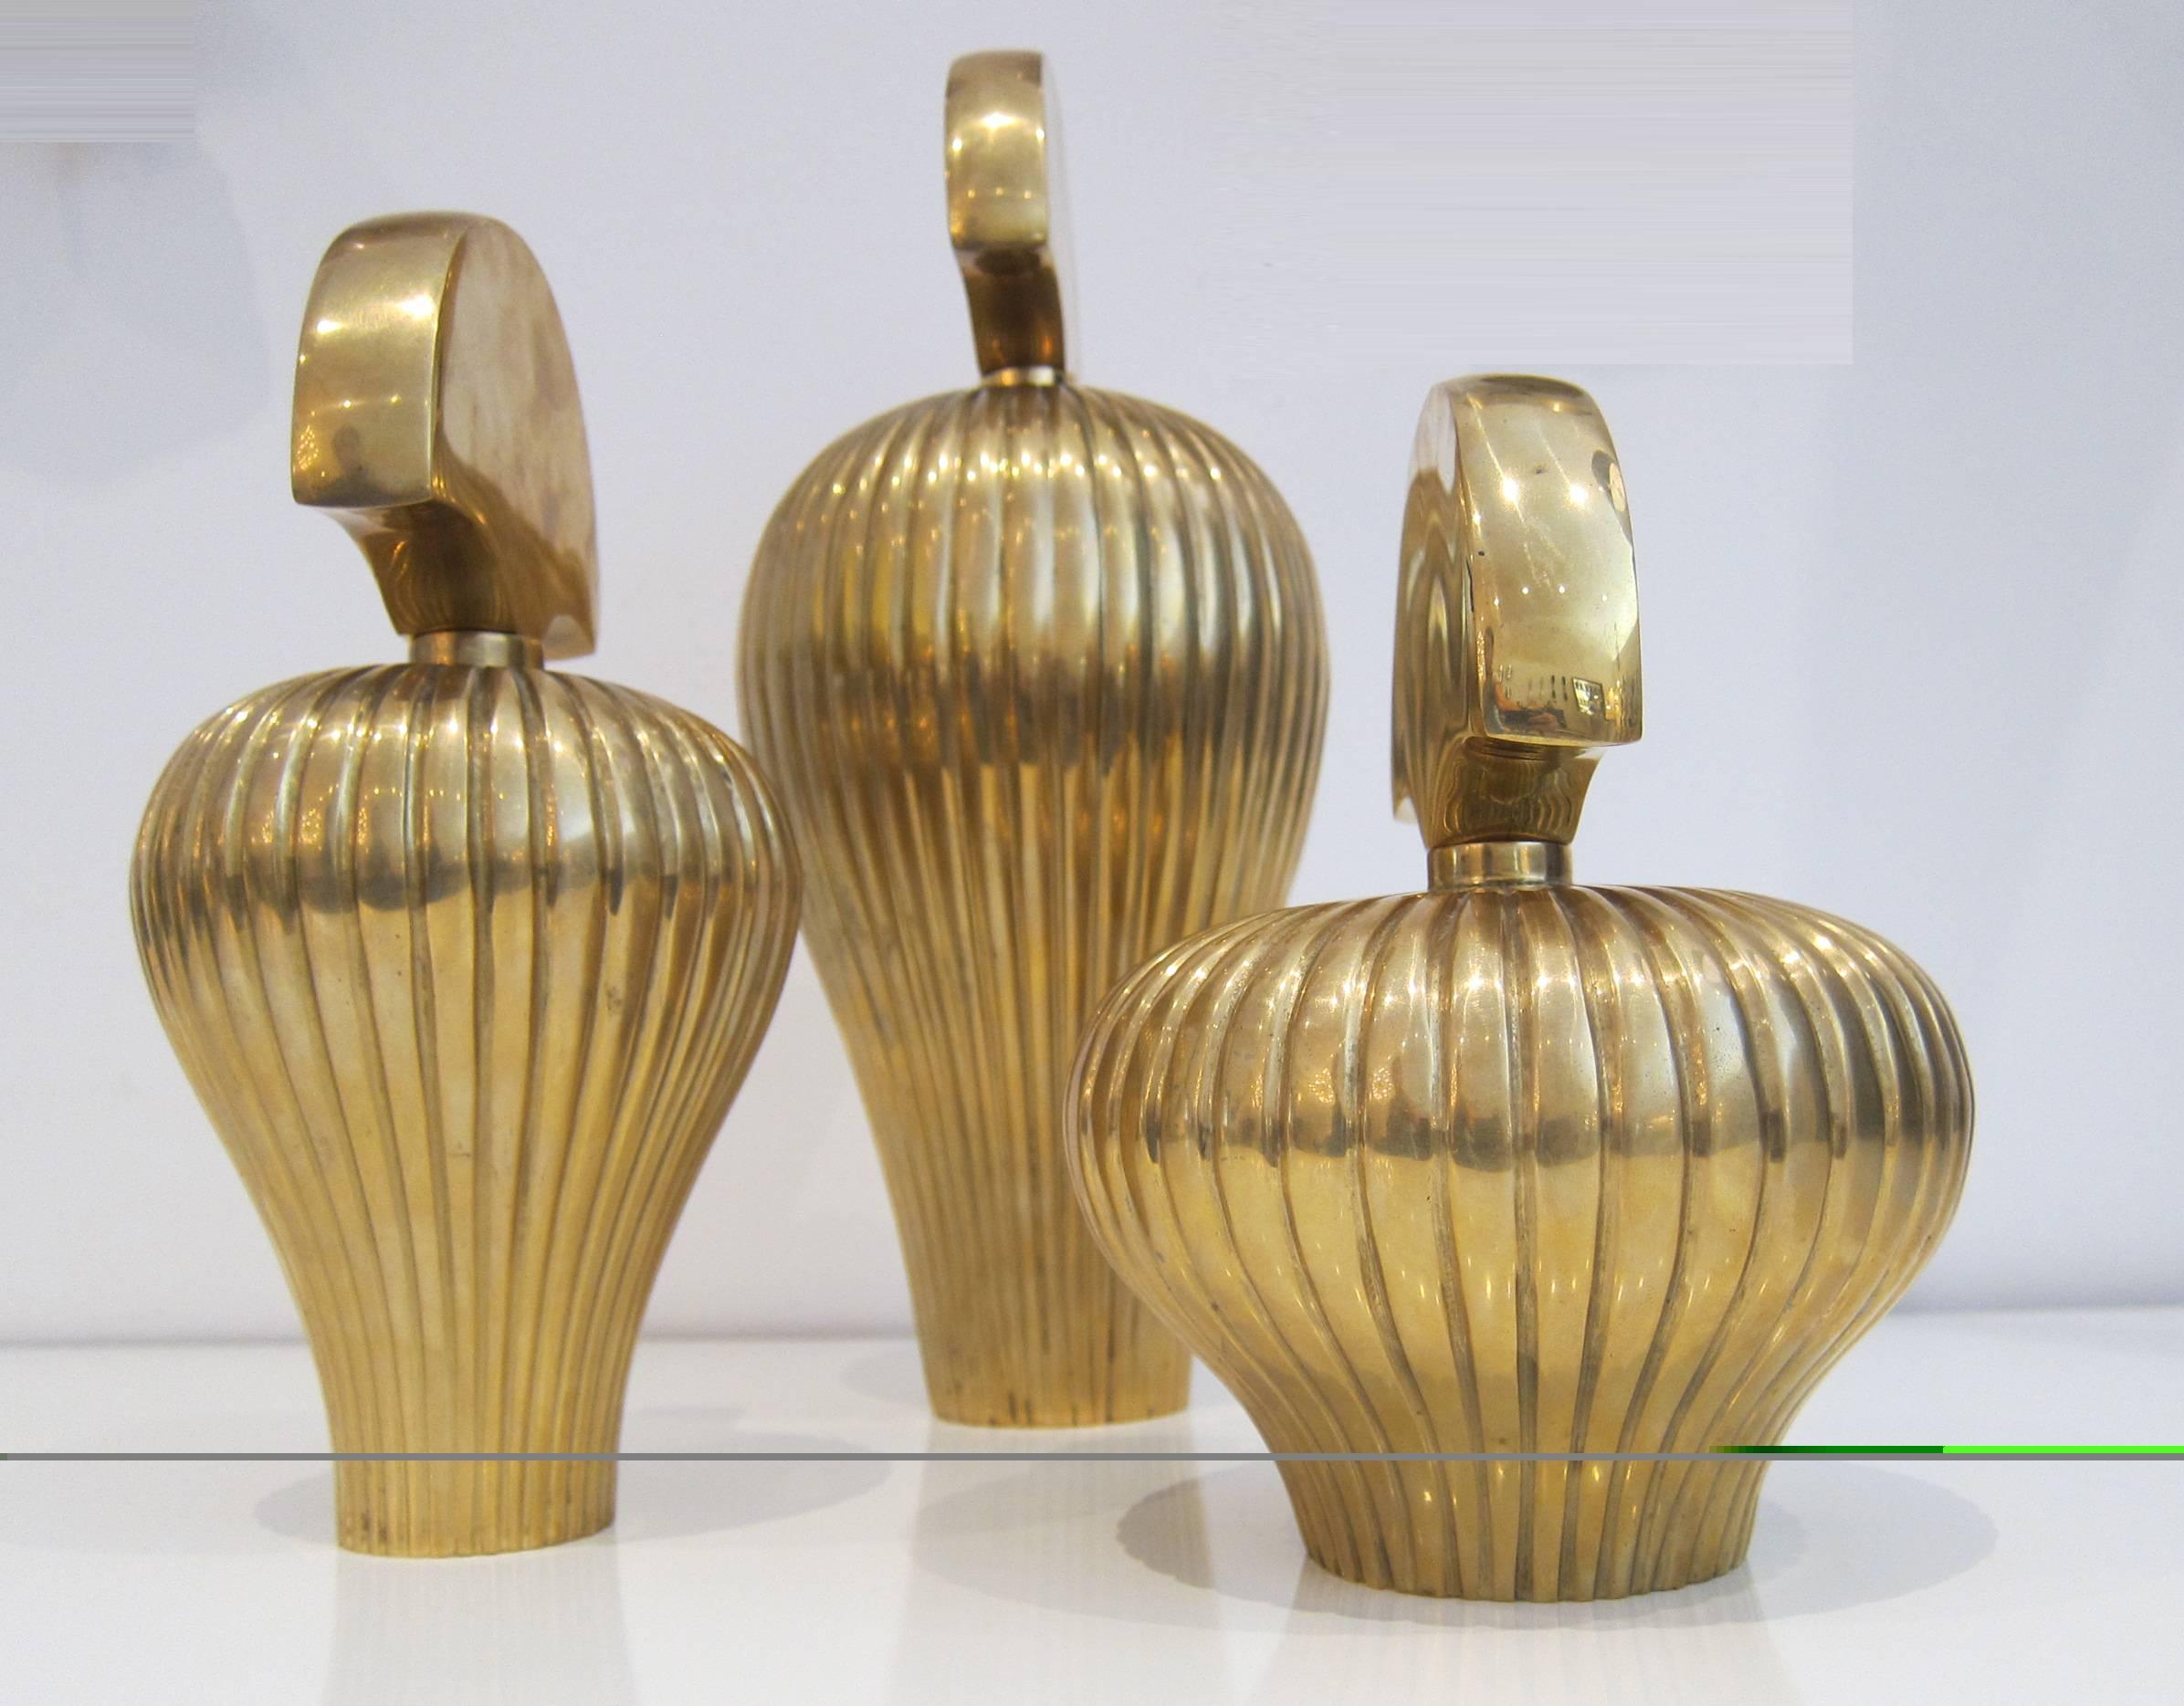 Elegant set of three solid brass decorative perfume bottles. Bottles are unmarked, sizes are 13